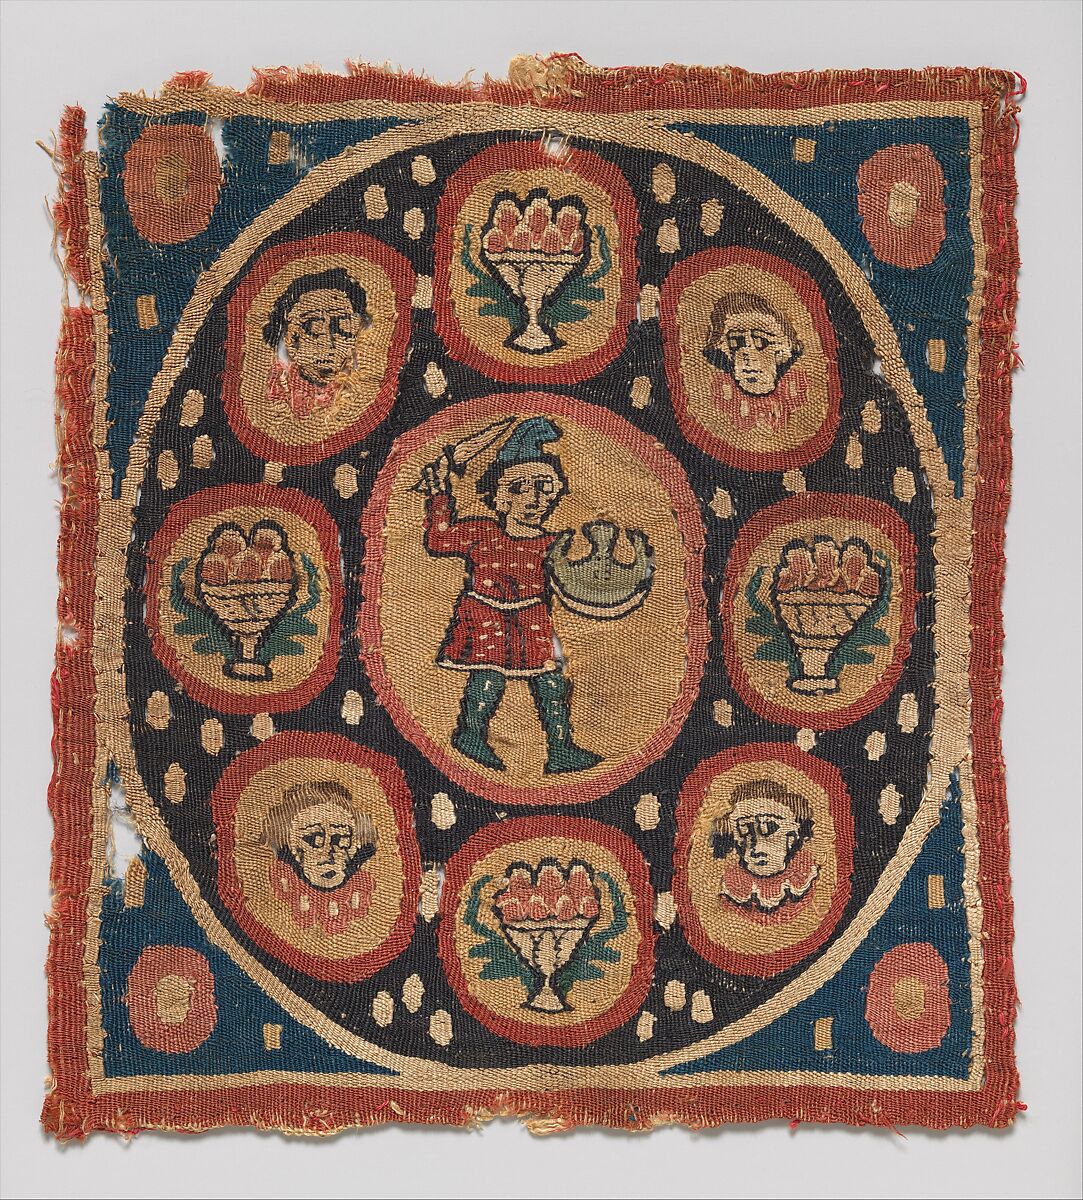 Square with Warrior, Wool, linen; plain weave, tapestry weave